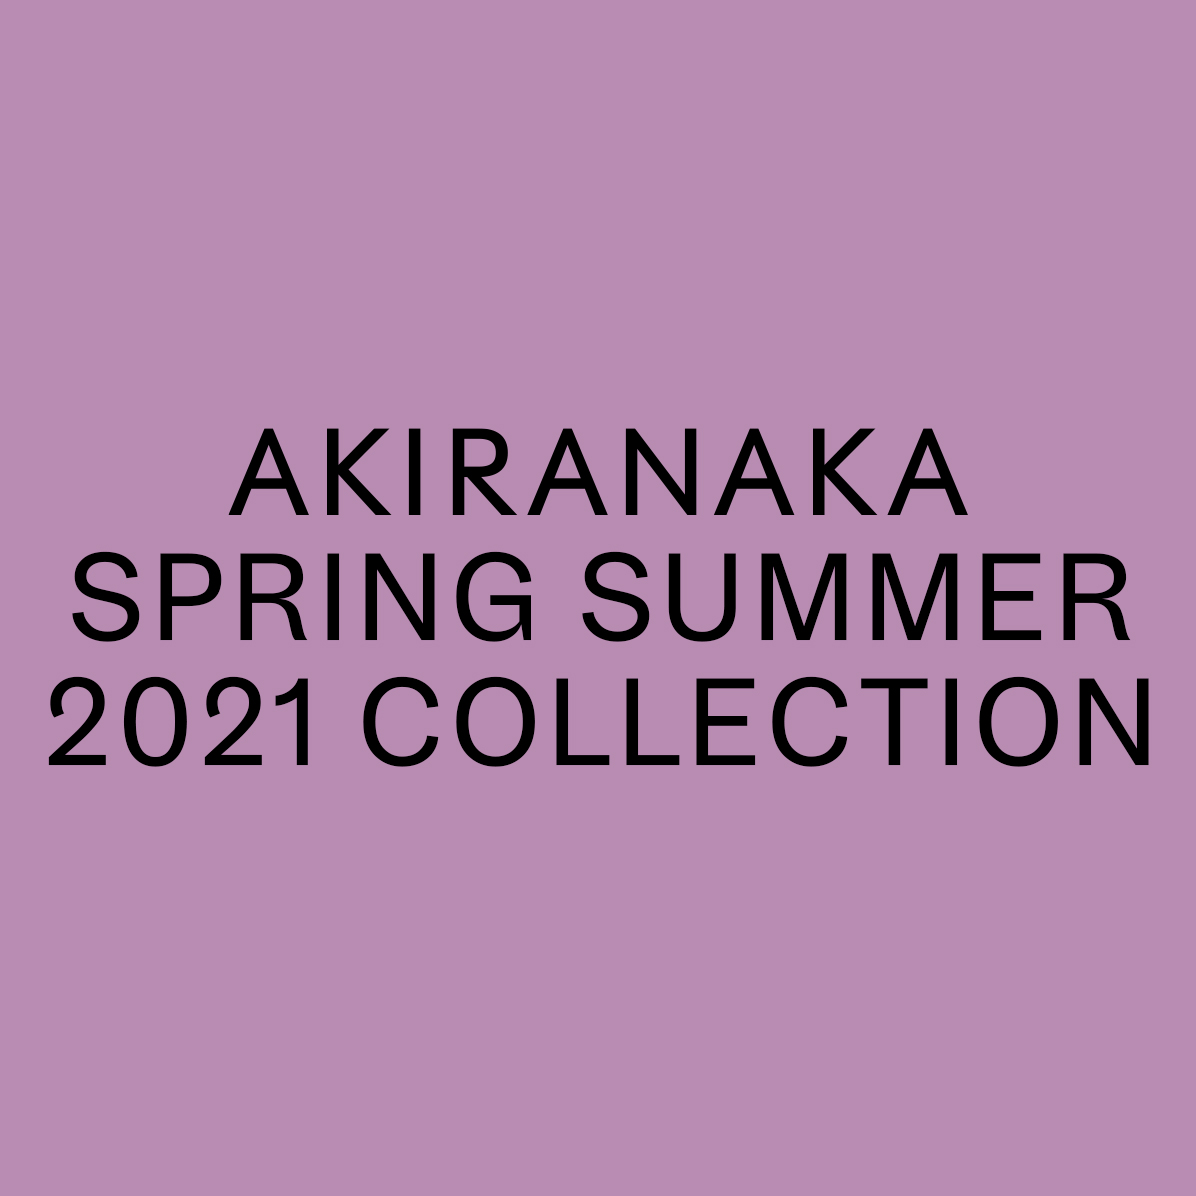 SPRING SUMMER 2021 COLLECTION